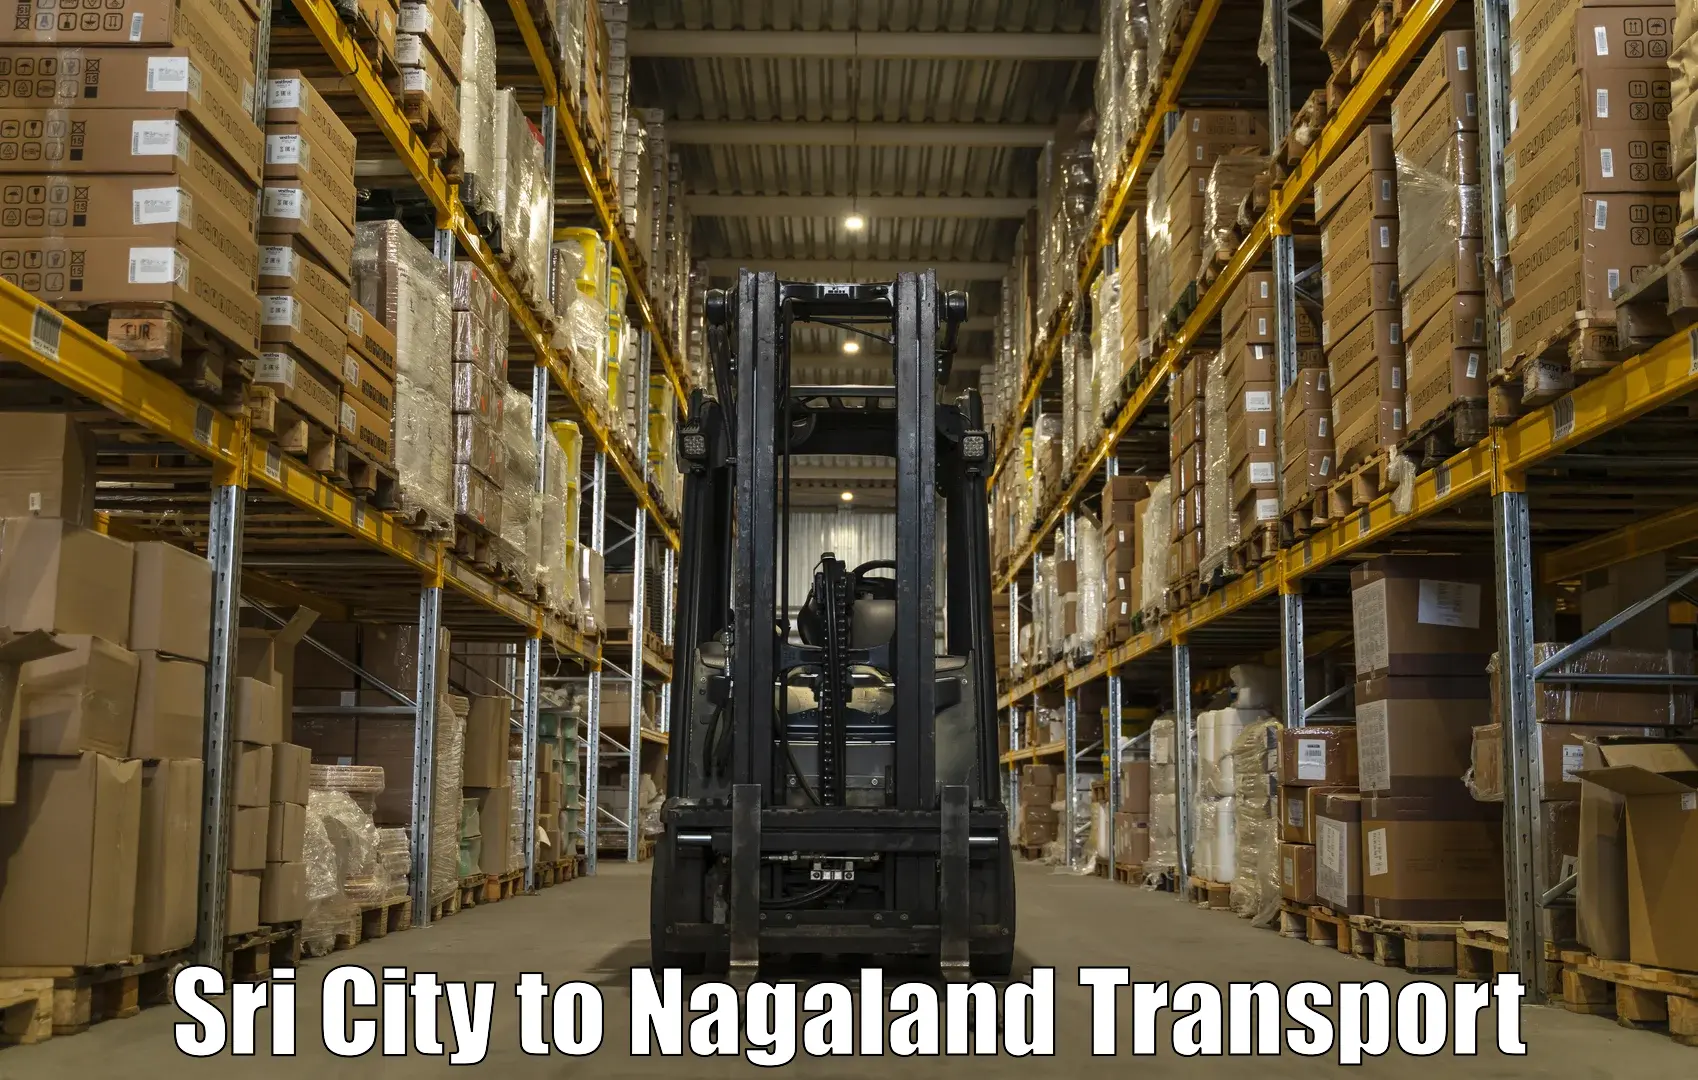 Transport in sharing in Sri City to Nagaland